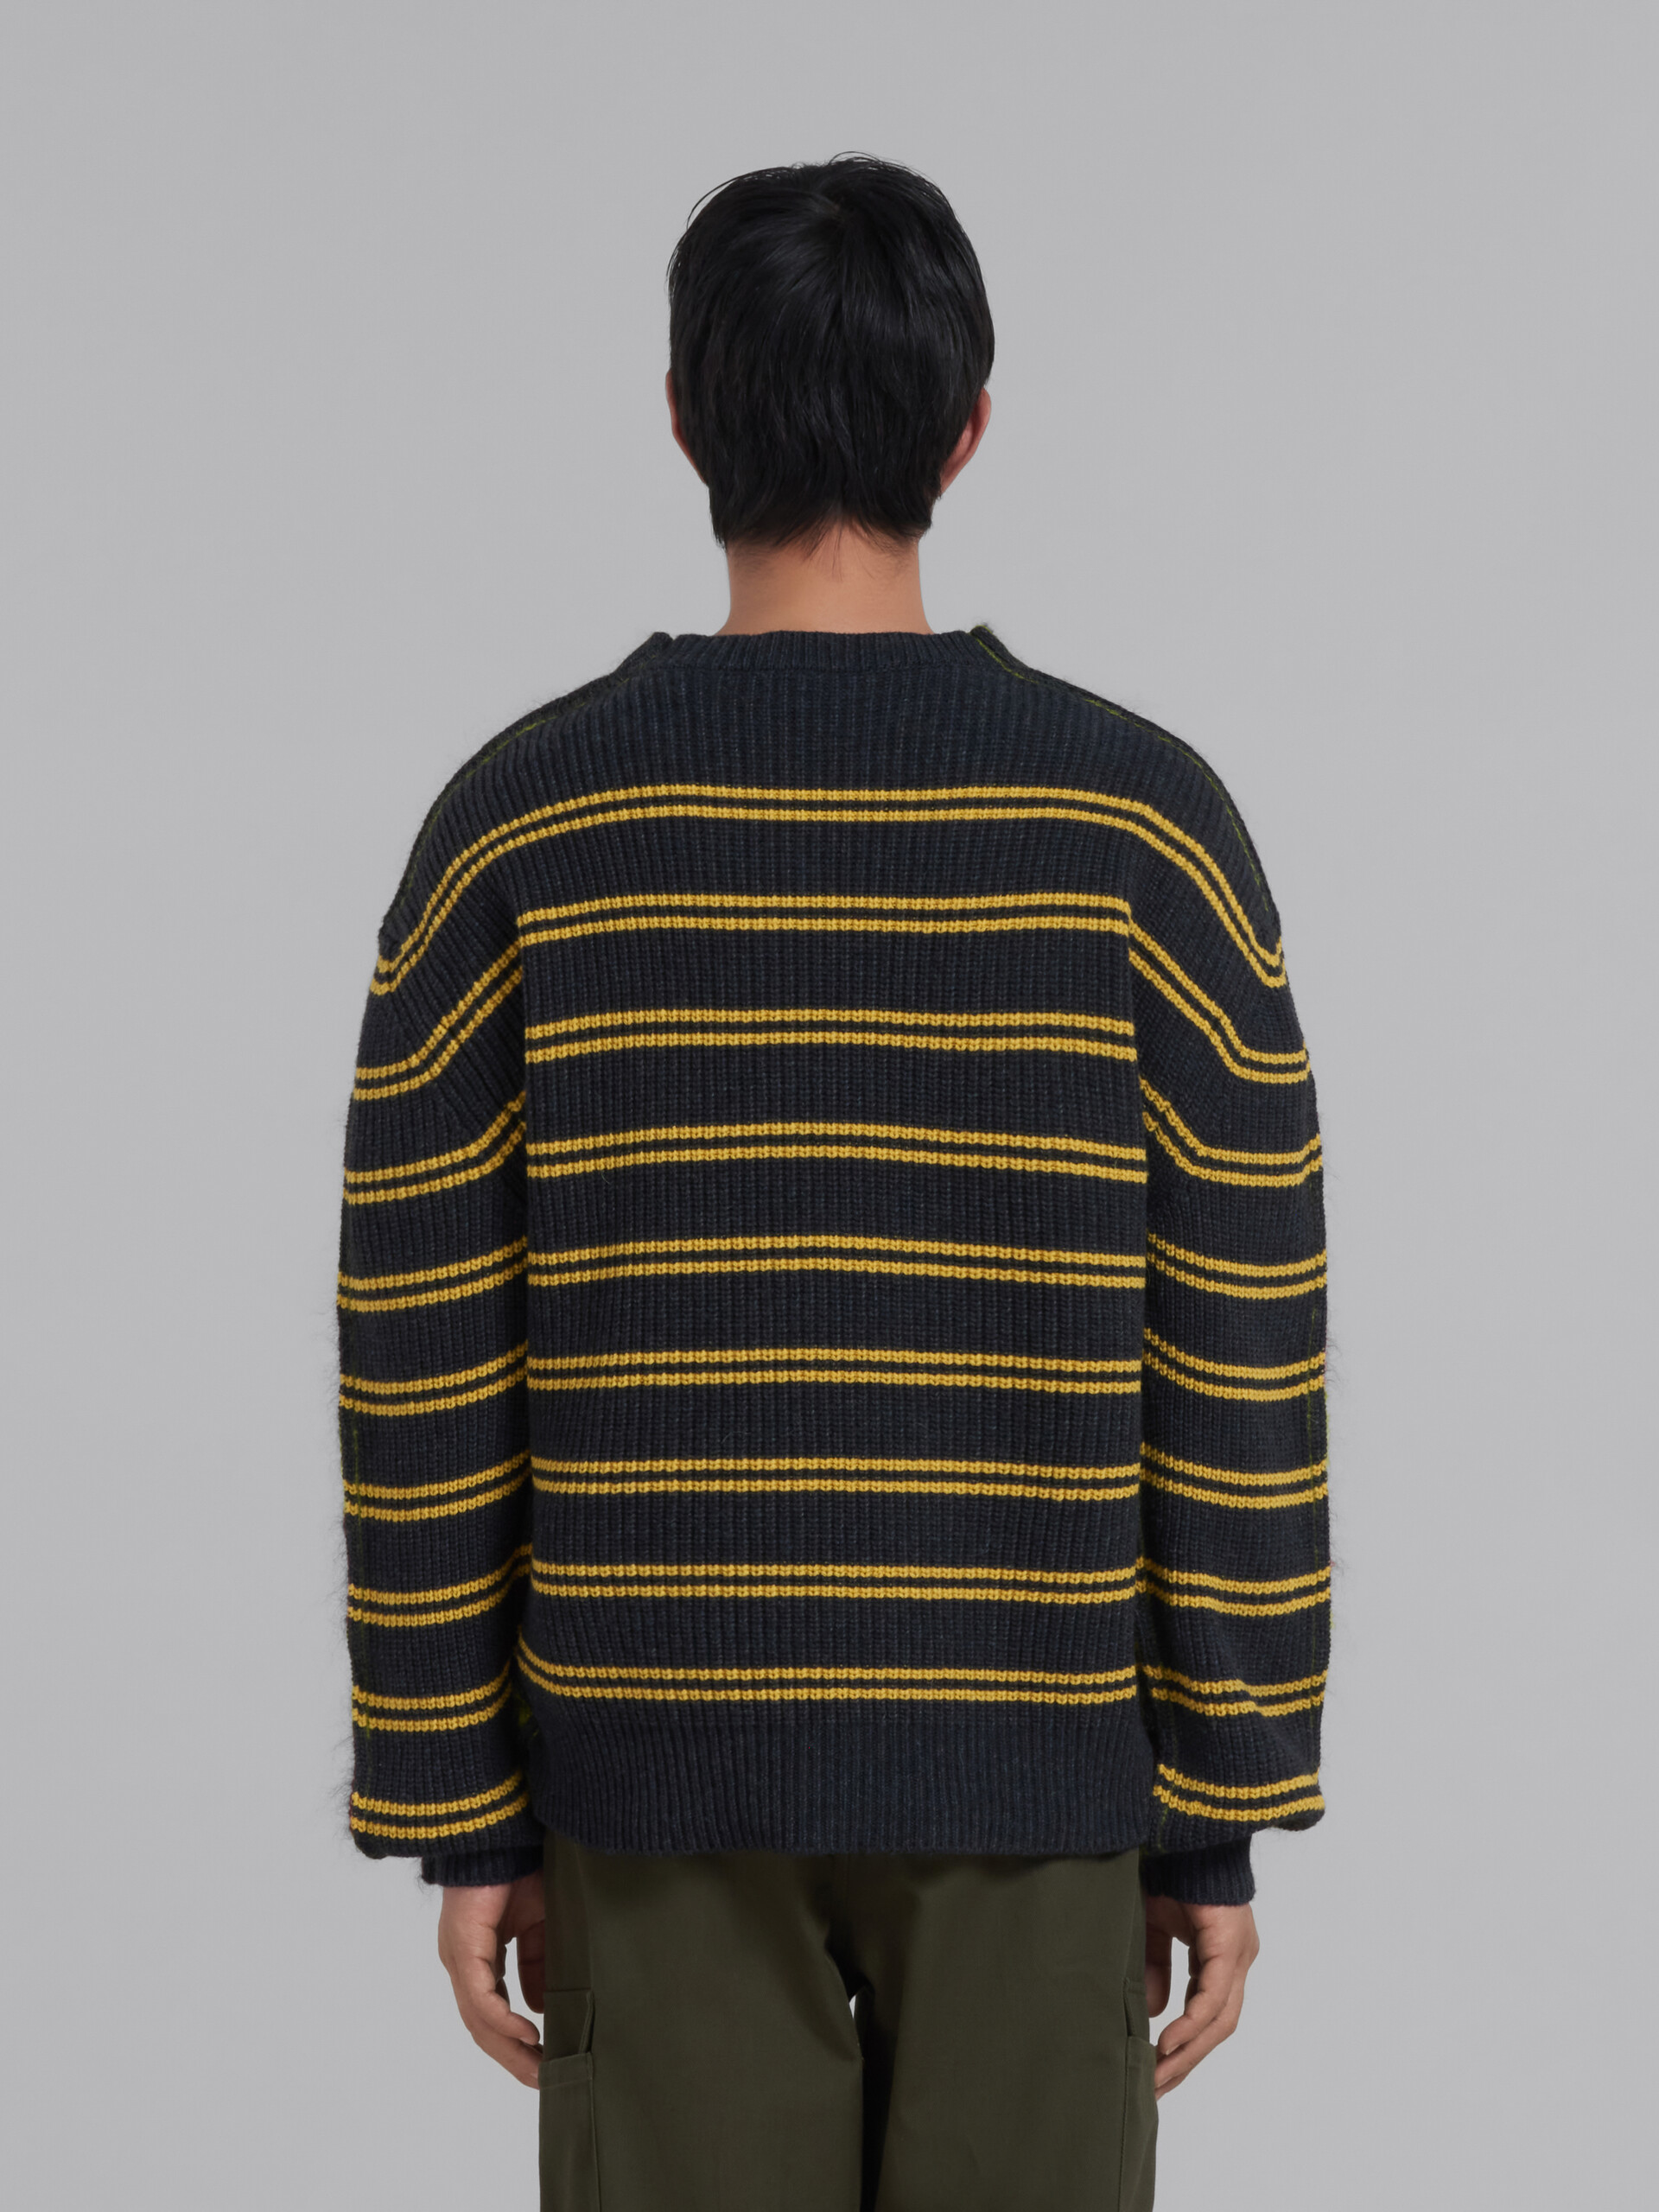 Mohair and wool sweater with multicolour stripes - Pullovers - Image 3